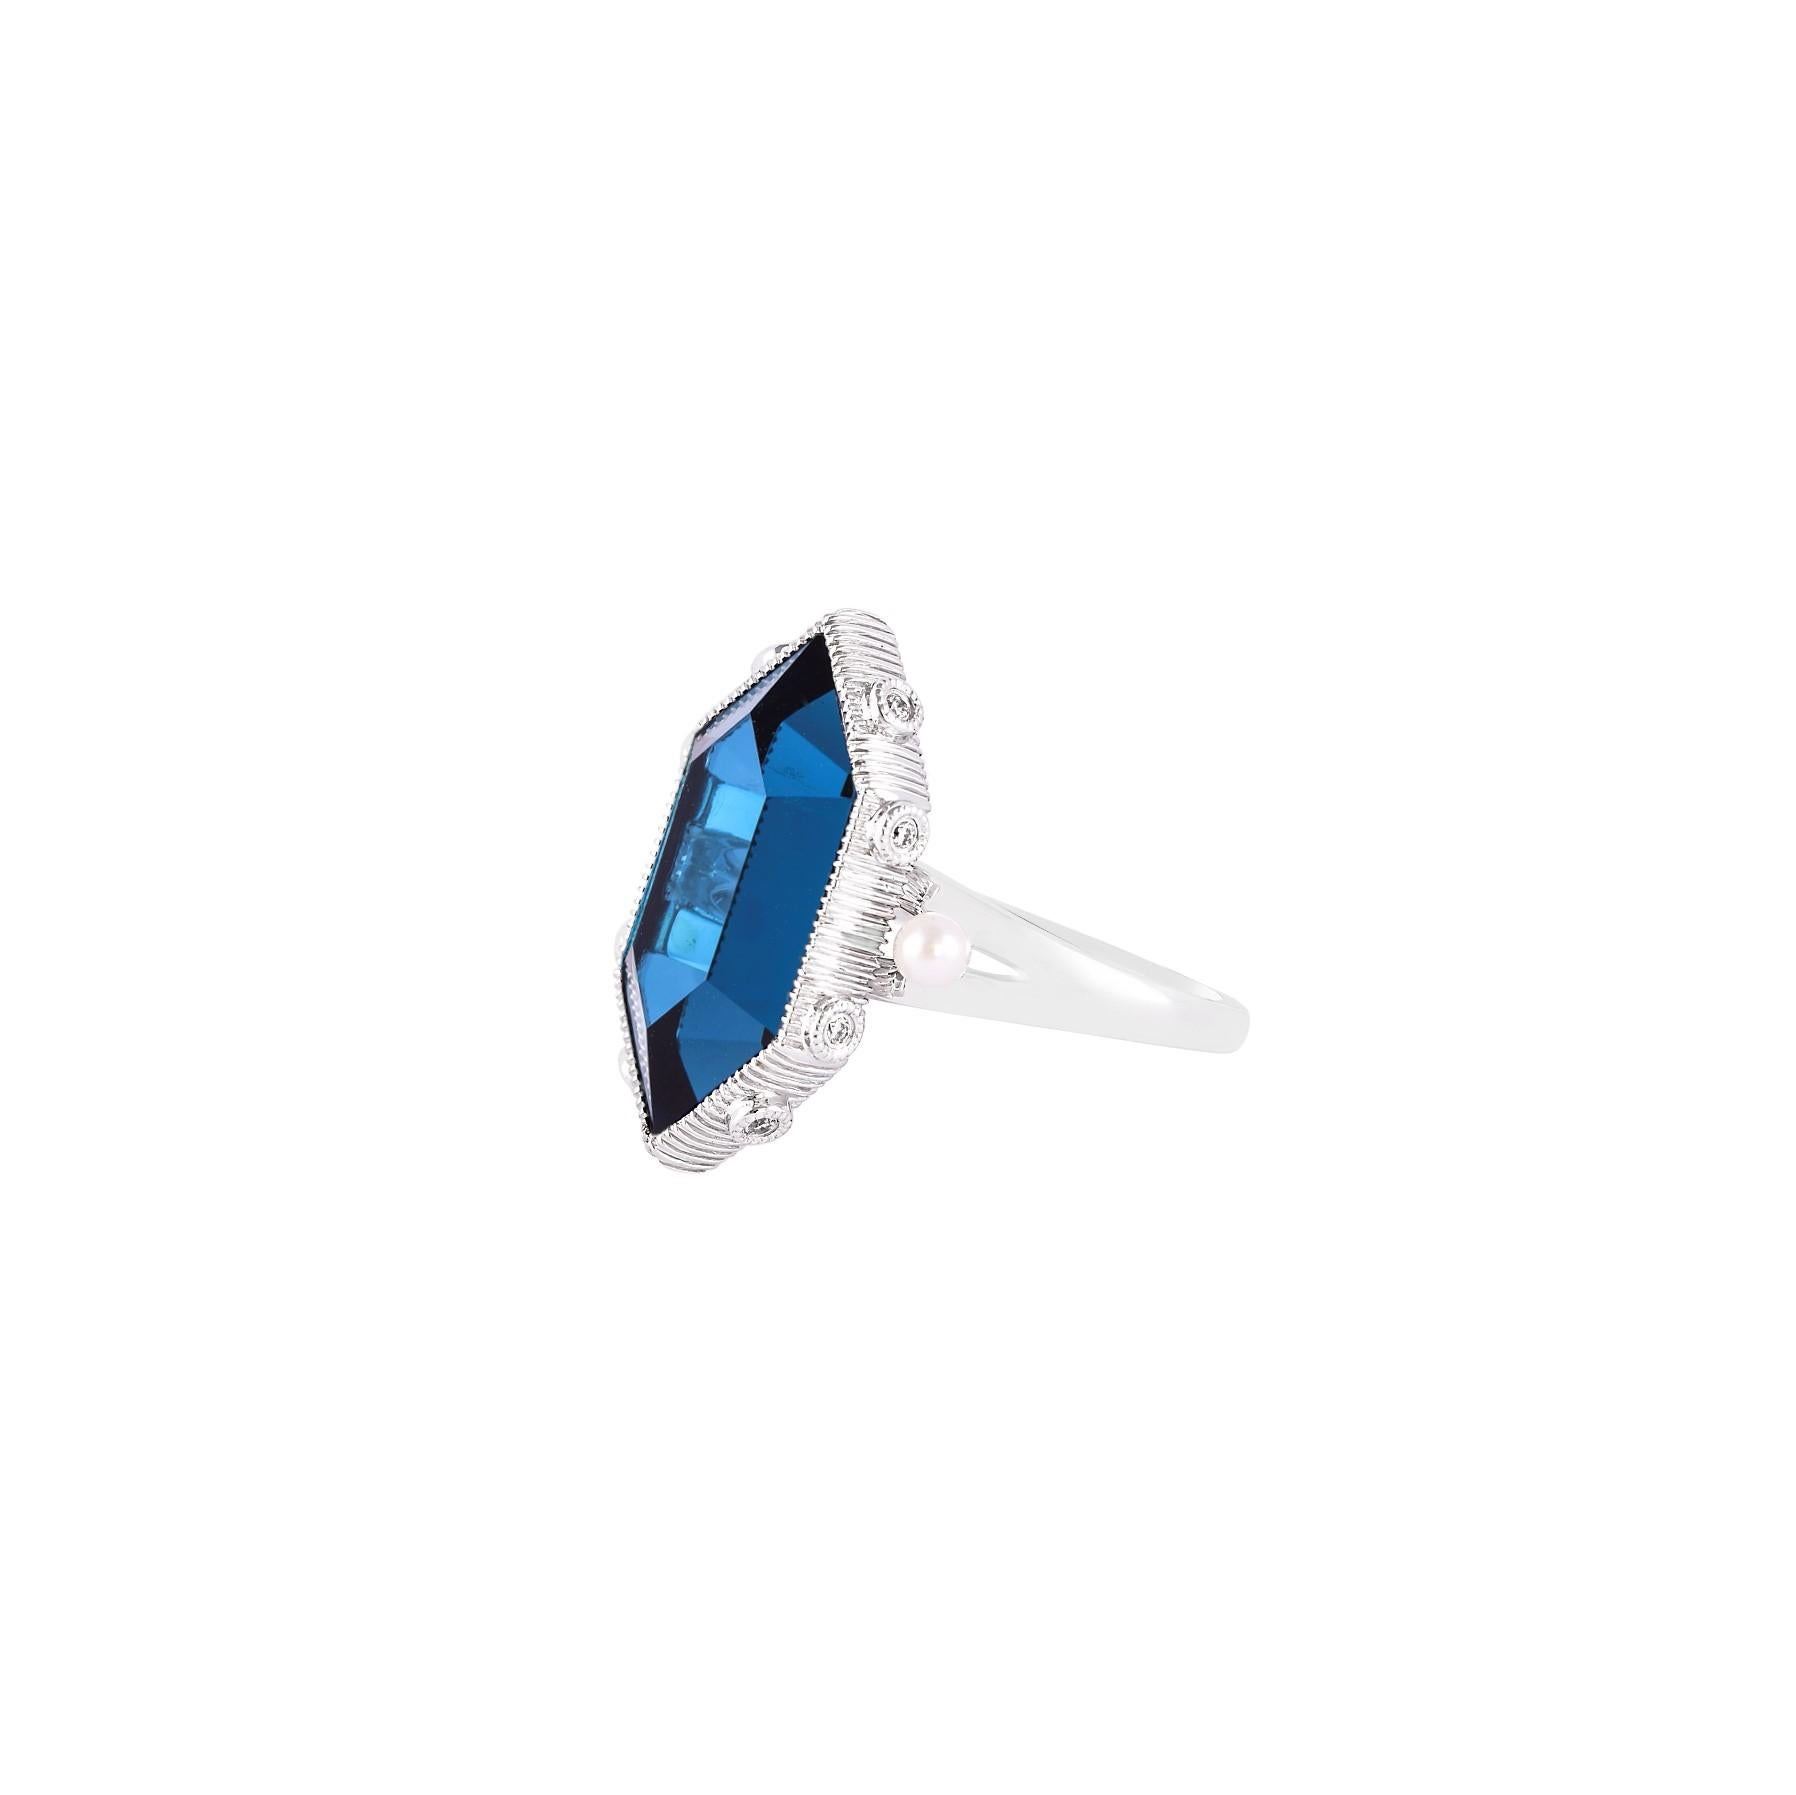 Contemporary 10.46 Carat London Blue Topaz Ring in 18 Karat White Gold with Diamonds & Pearls